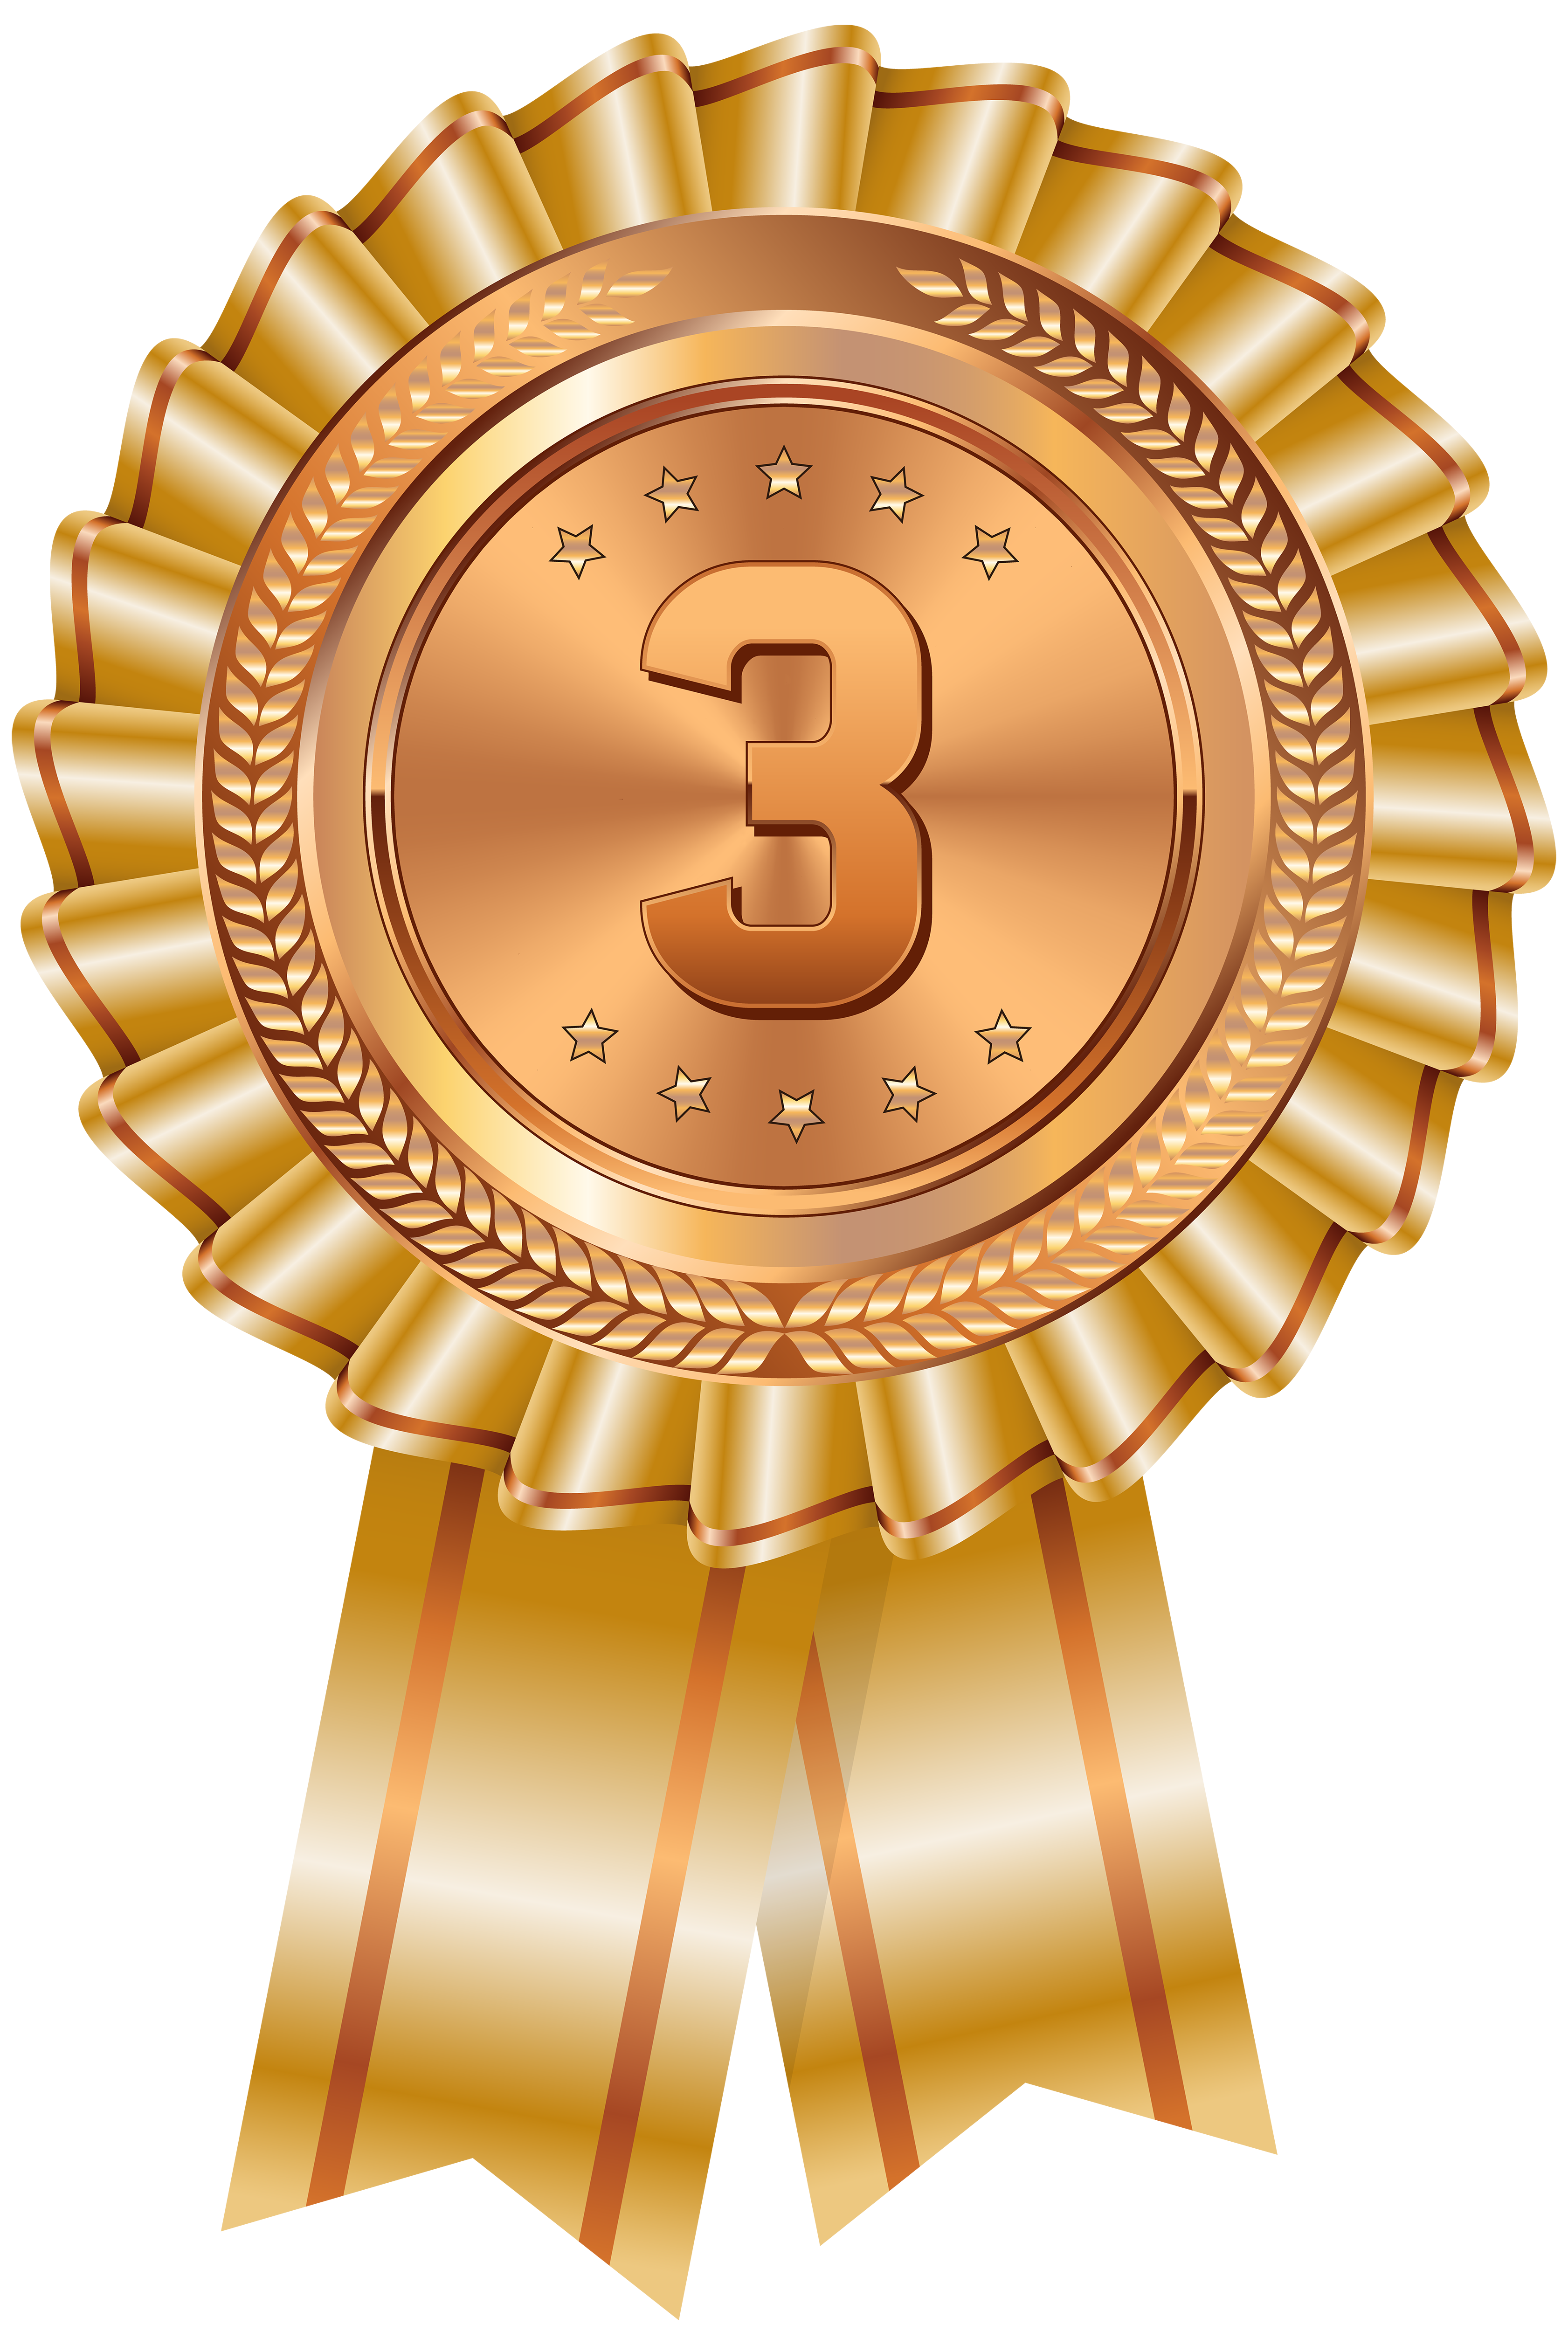 Medal Transparent Clip Art Image​ | Gallery Yopriceville - Free Images and Transparent PNG Clipart